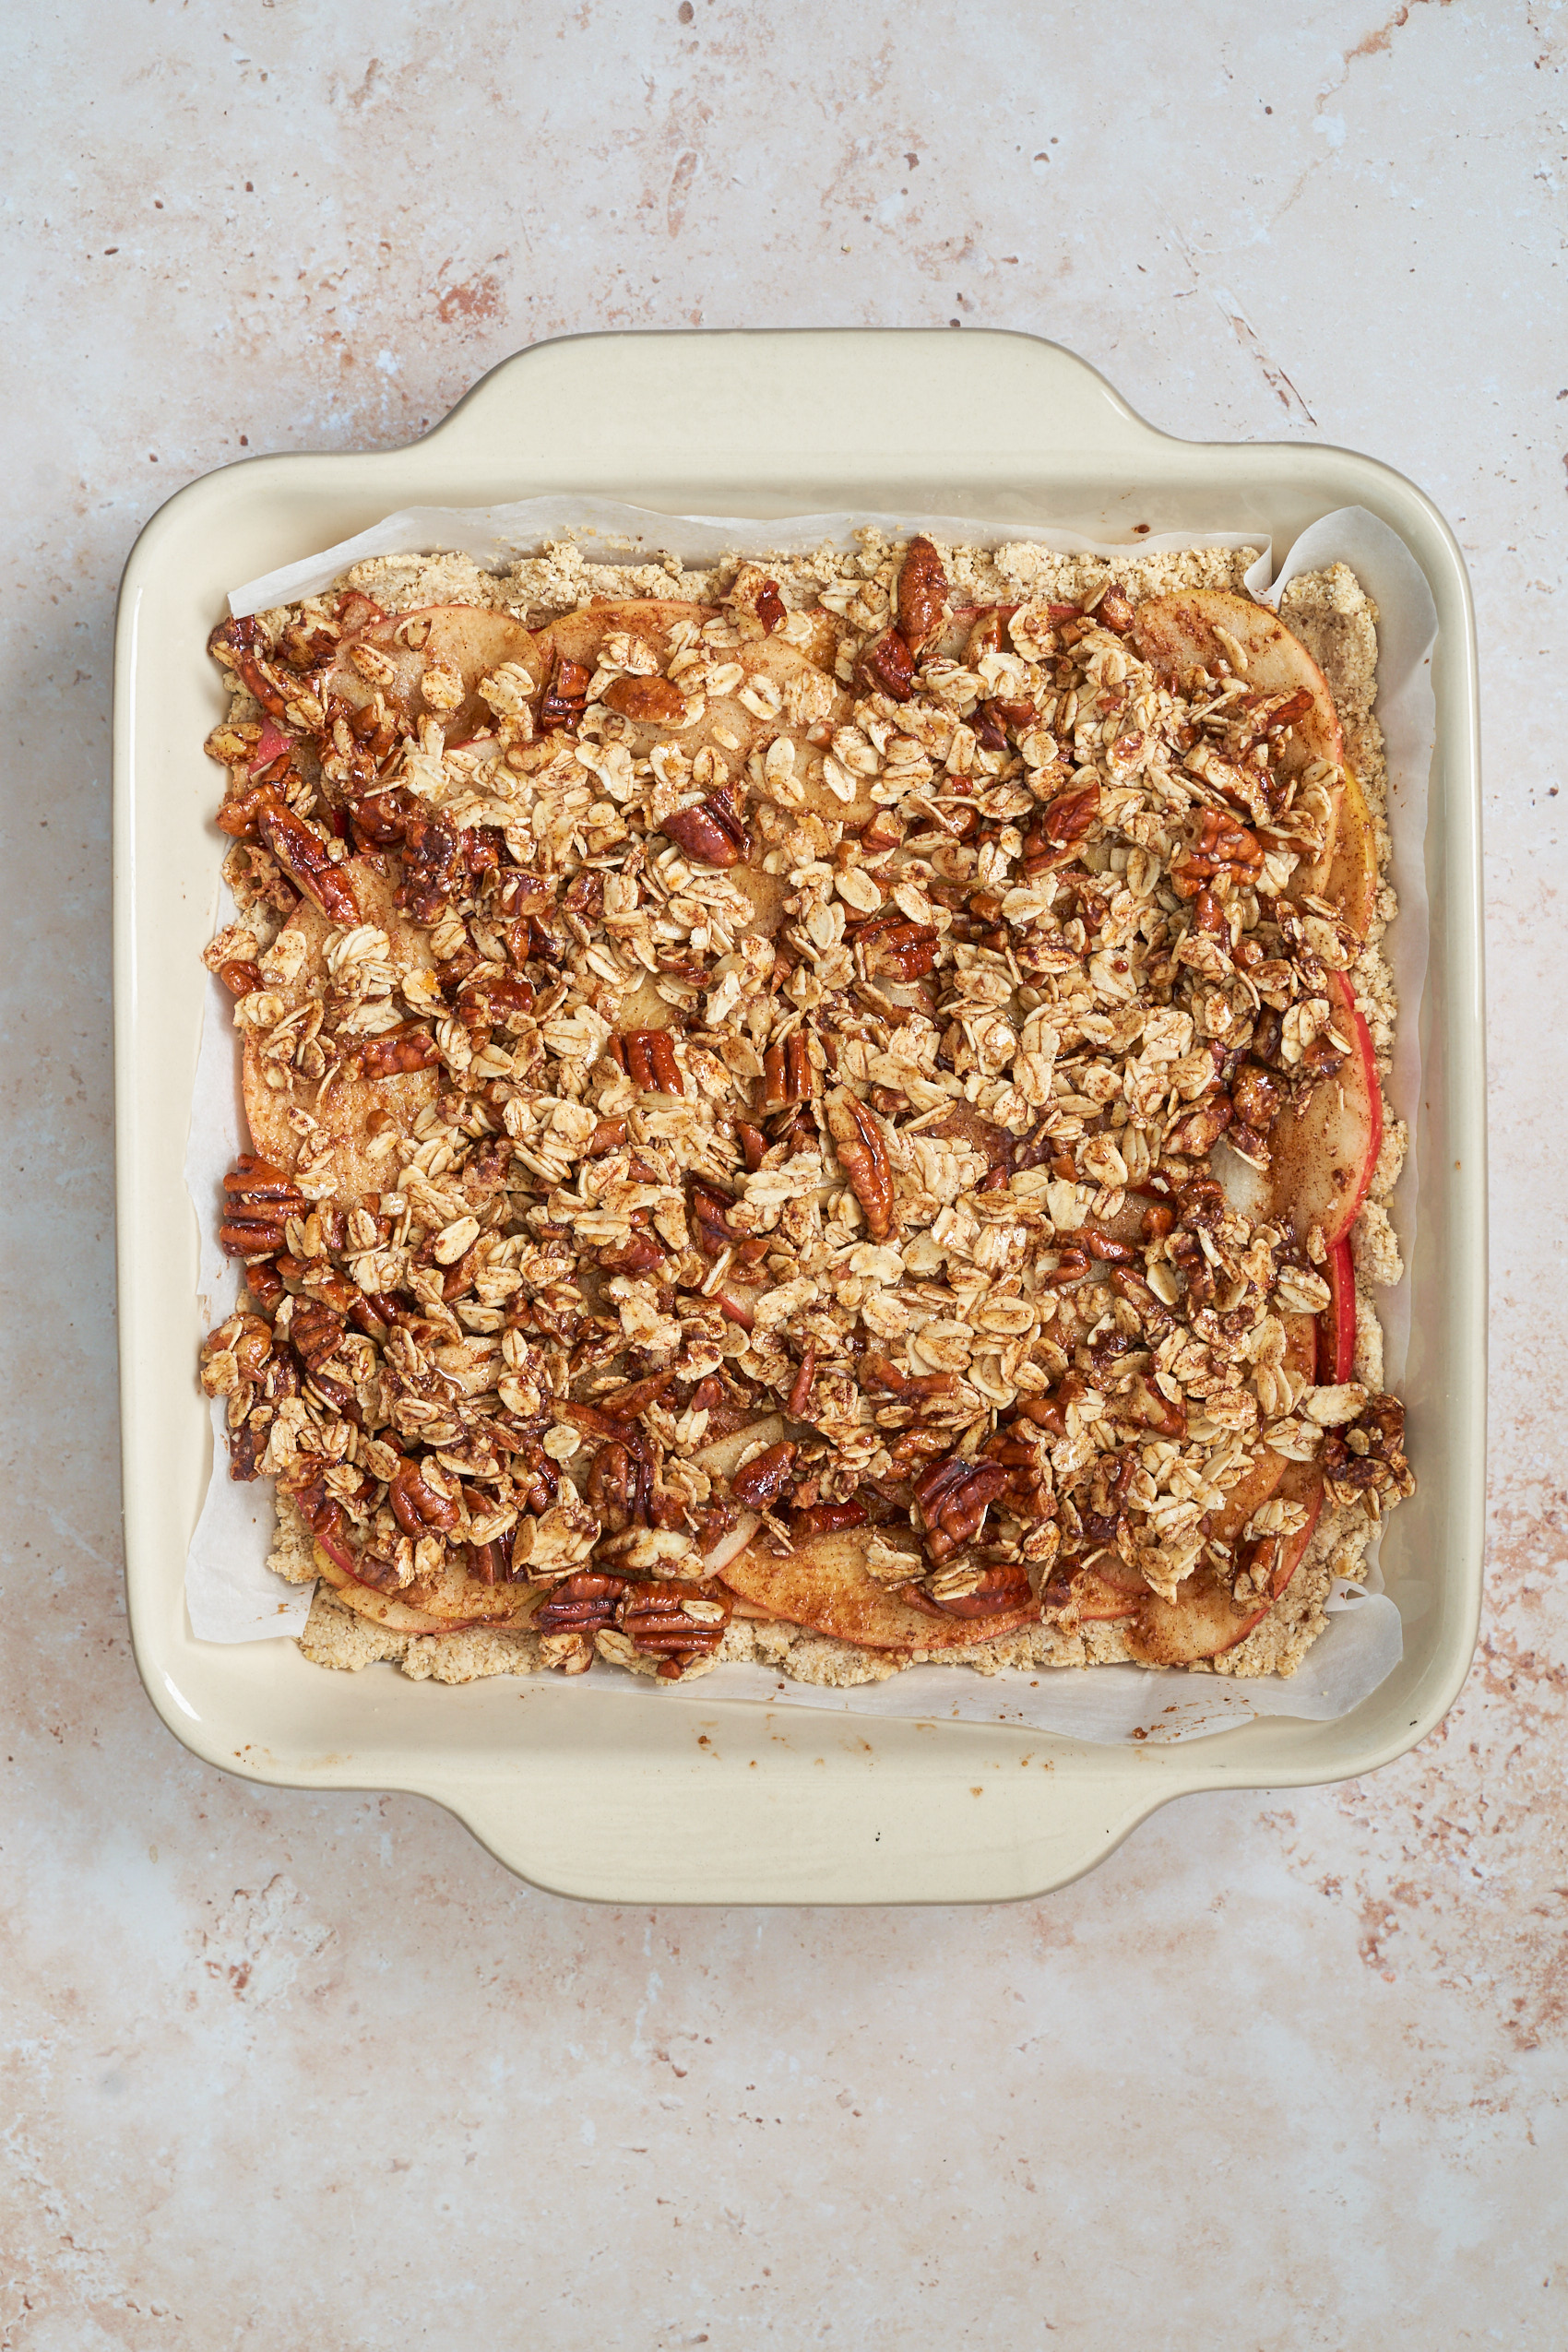 a gluten free crumble topping over sliced apples and pie dough in a baking dish